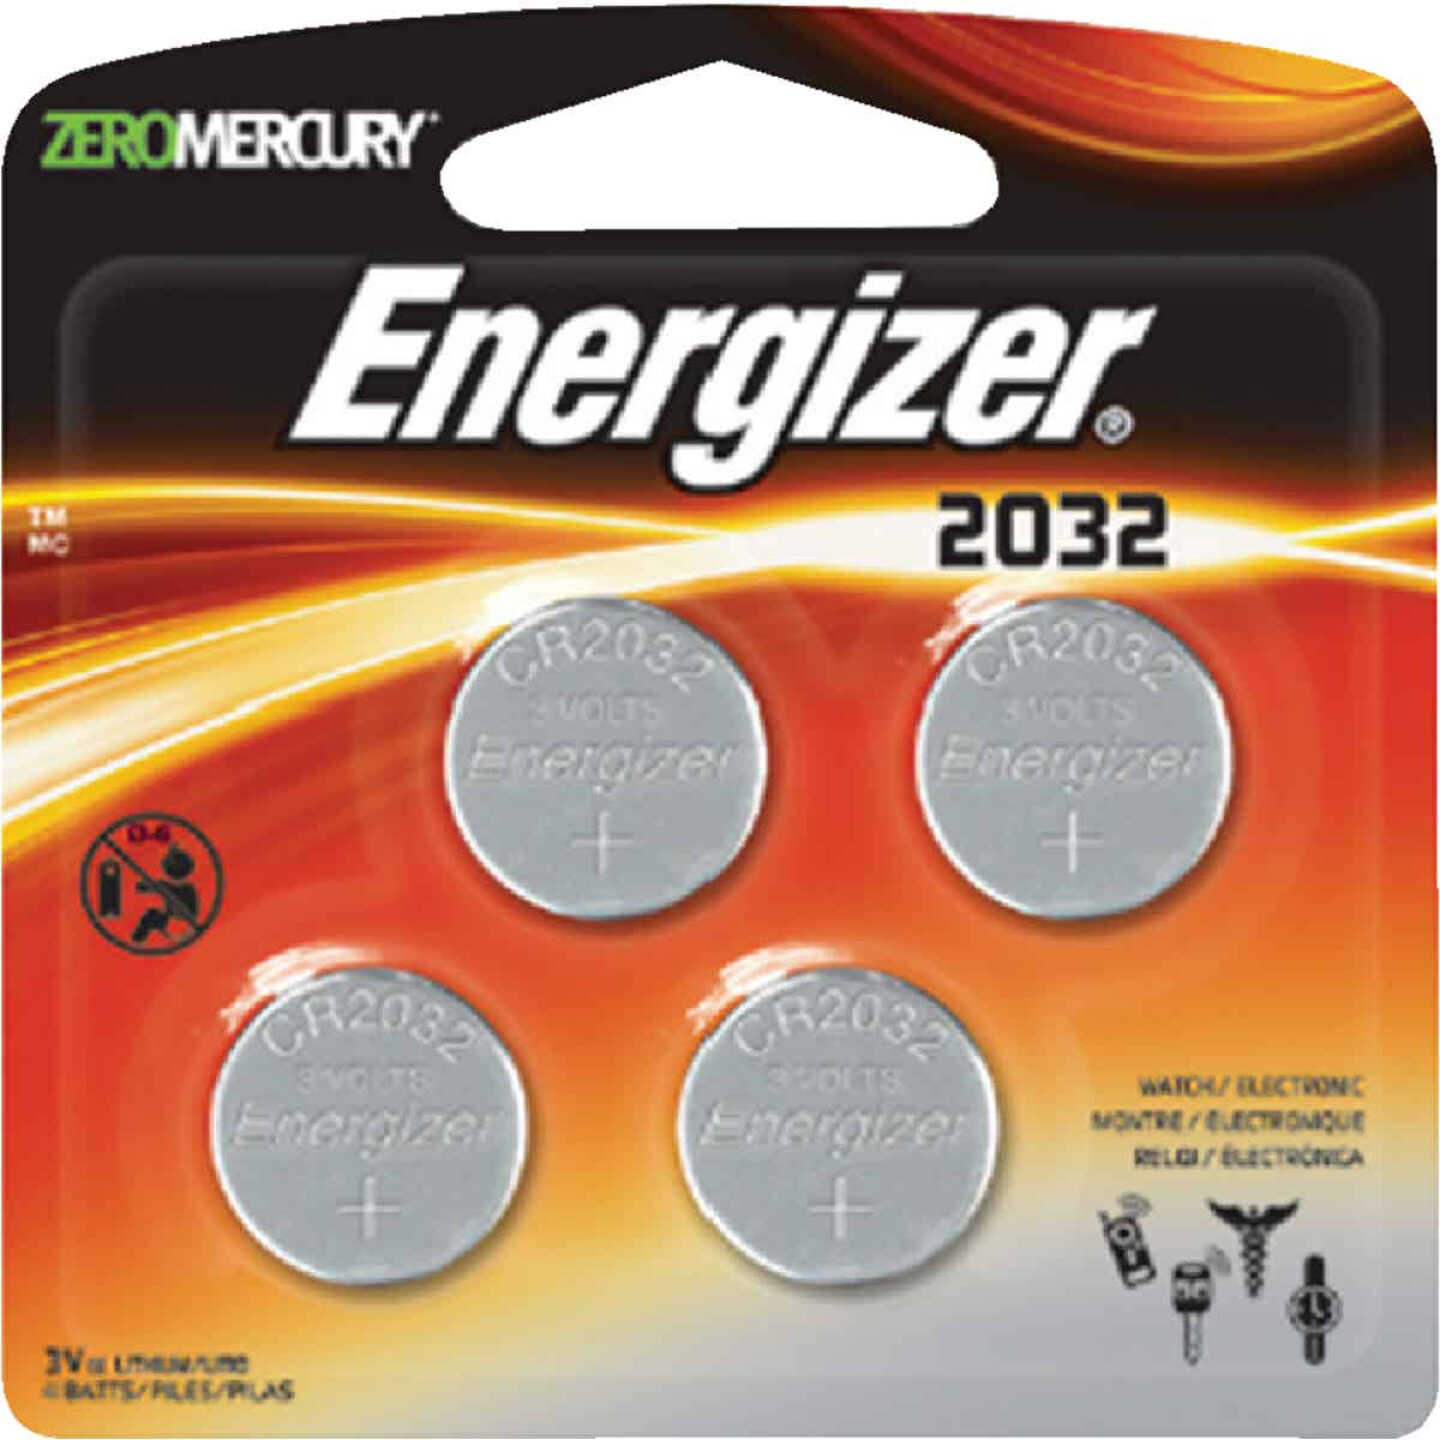 Energizer CR2032 Battery Lithium 2032 Button Cell 3V Coin Watch